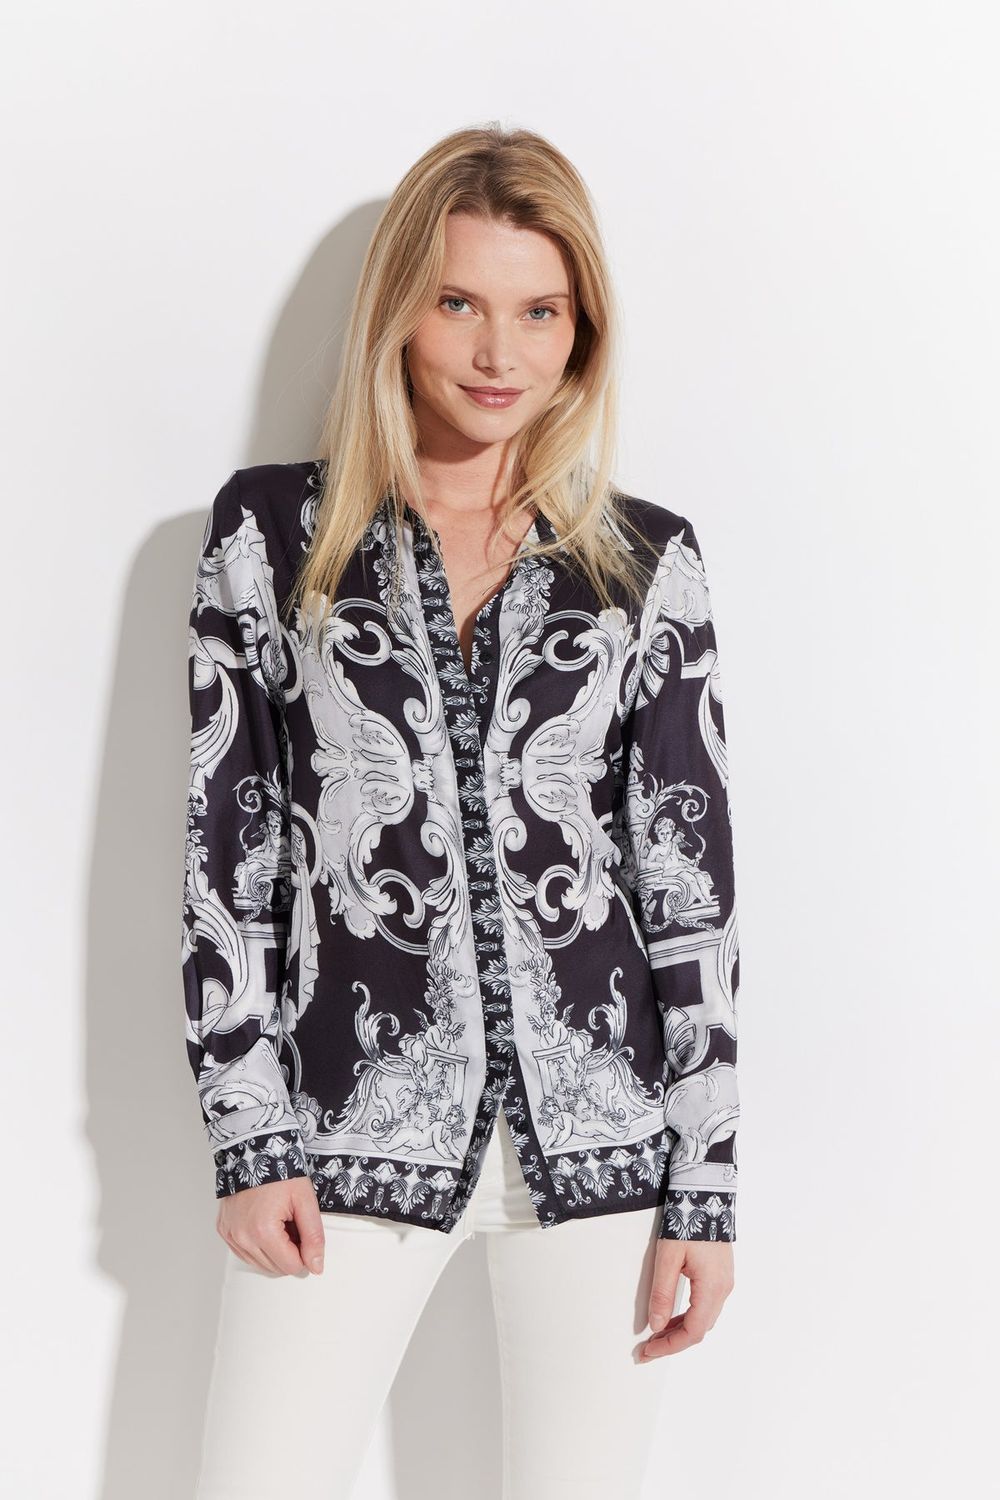 OOLALA Printed Button Front Long Sleeve Shirt, Color: Black/White, Size: S